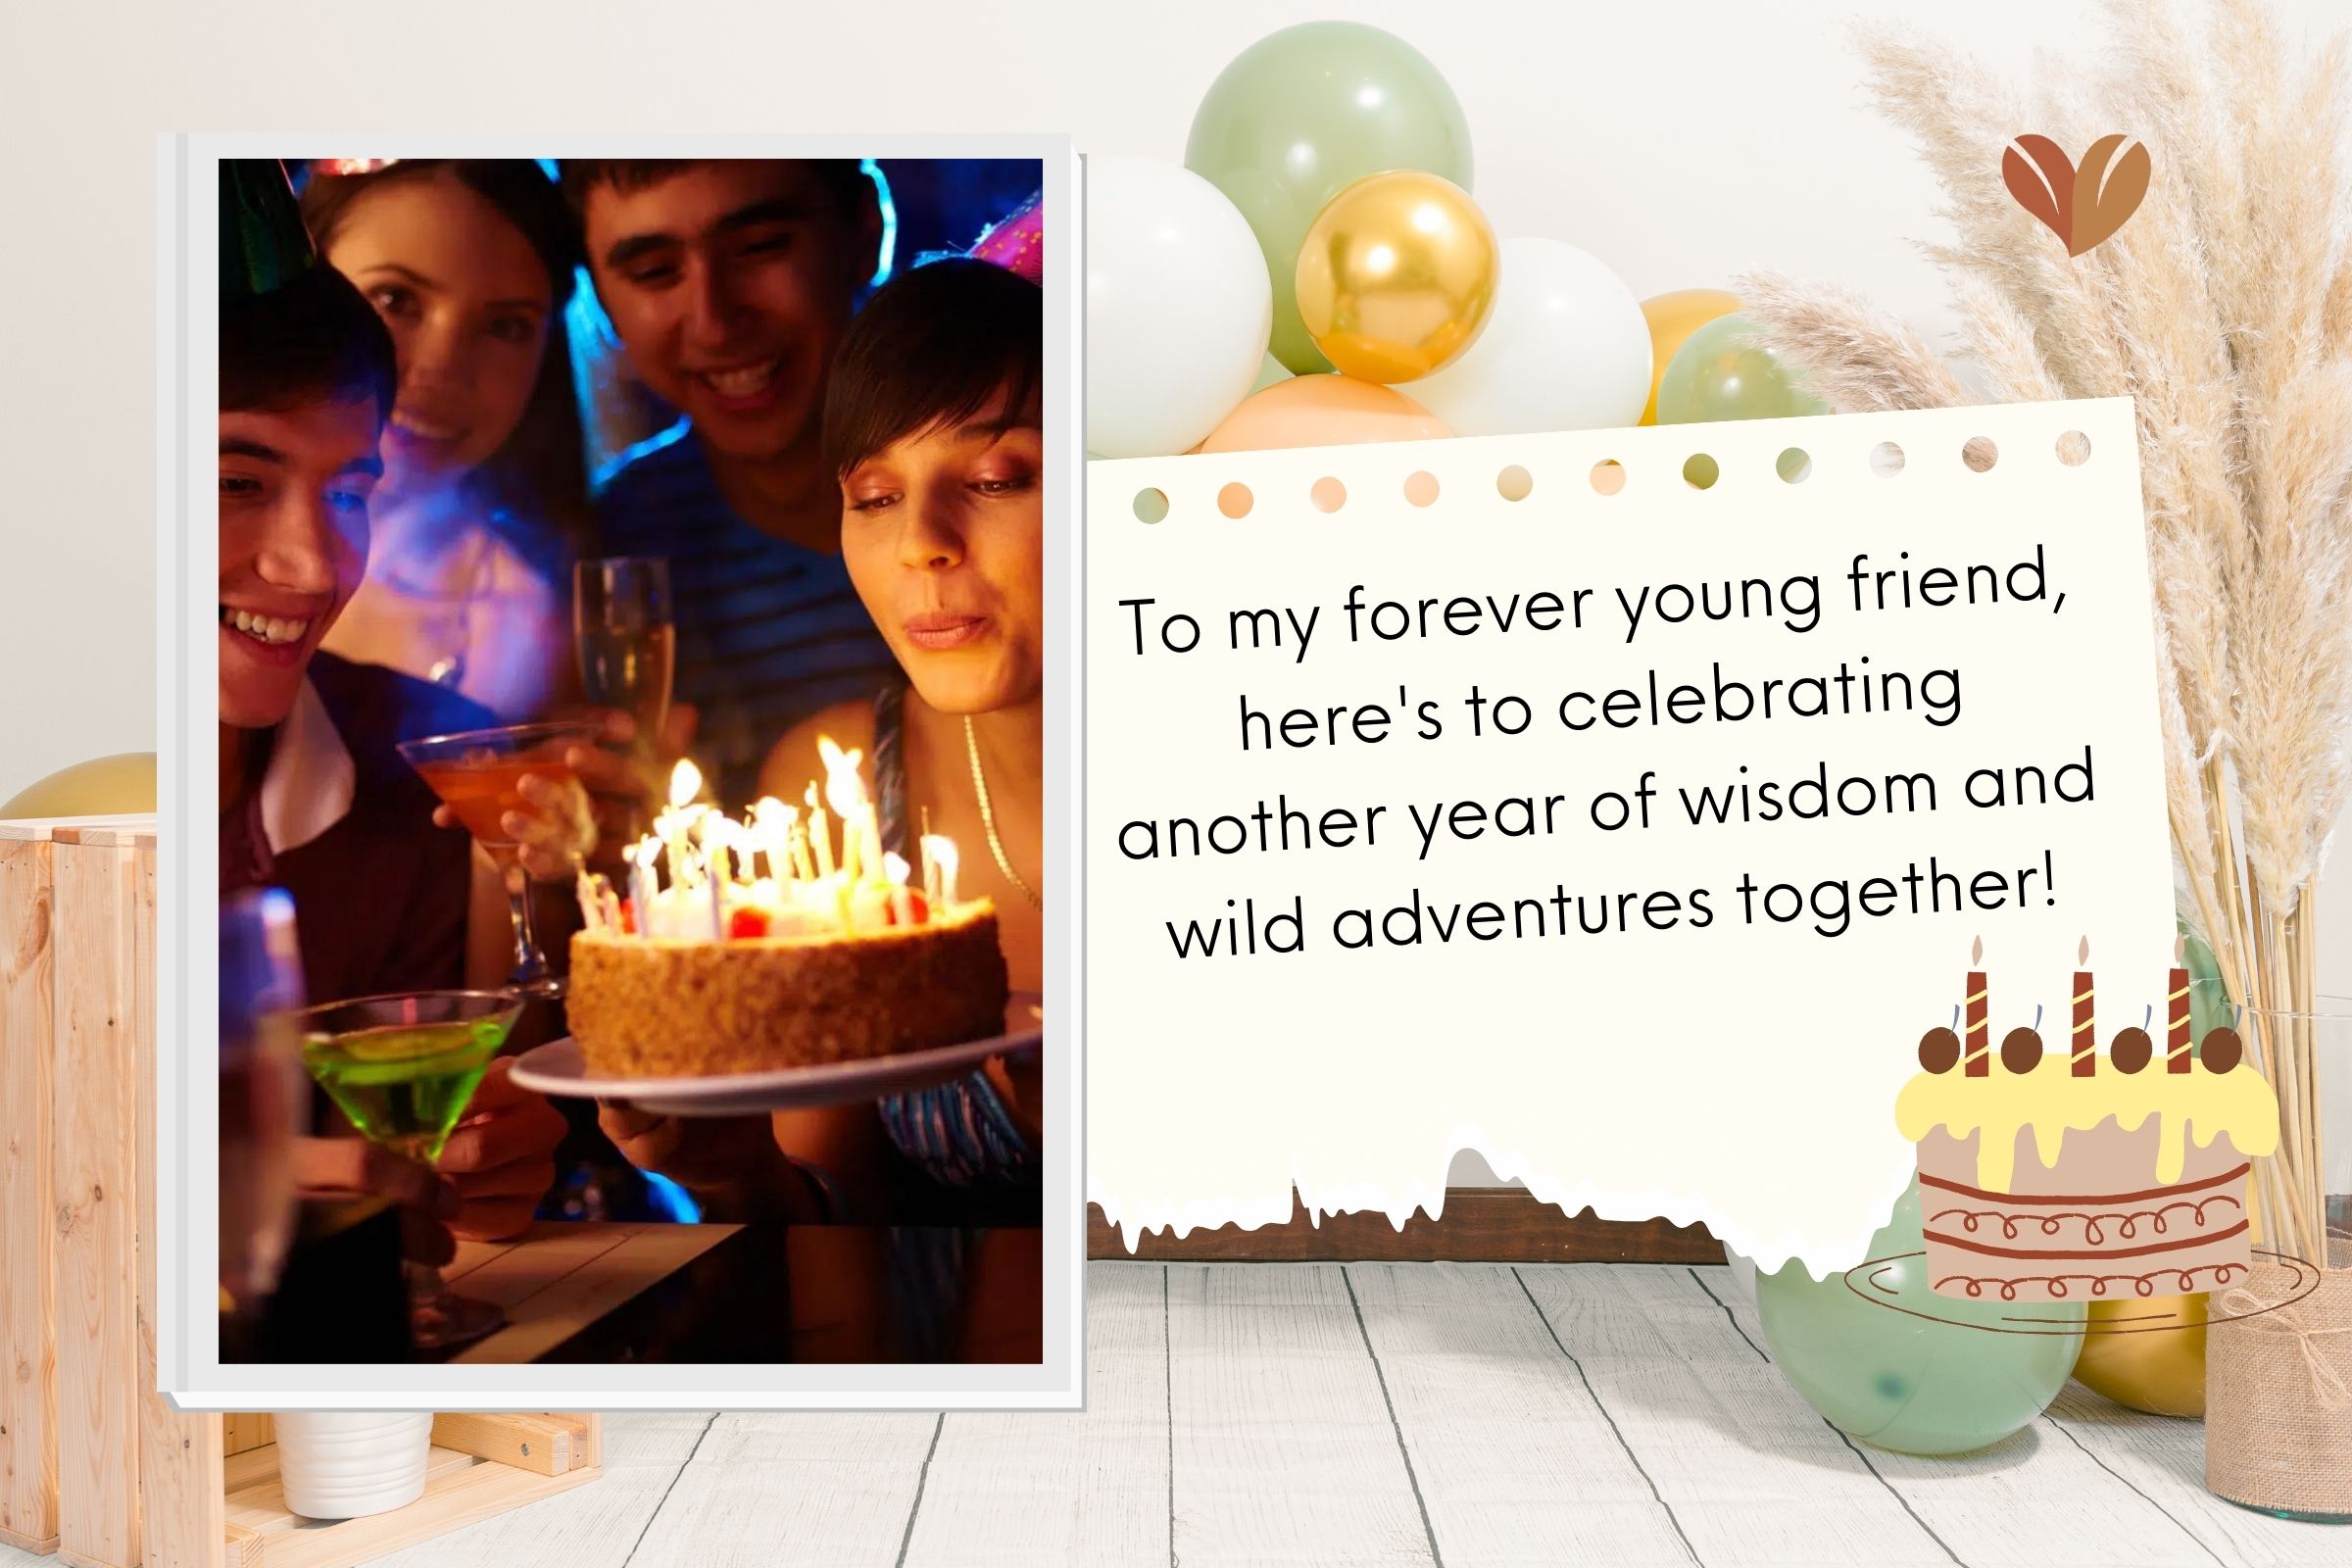 Celebrate your friends' birthdays with these touching quotes